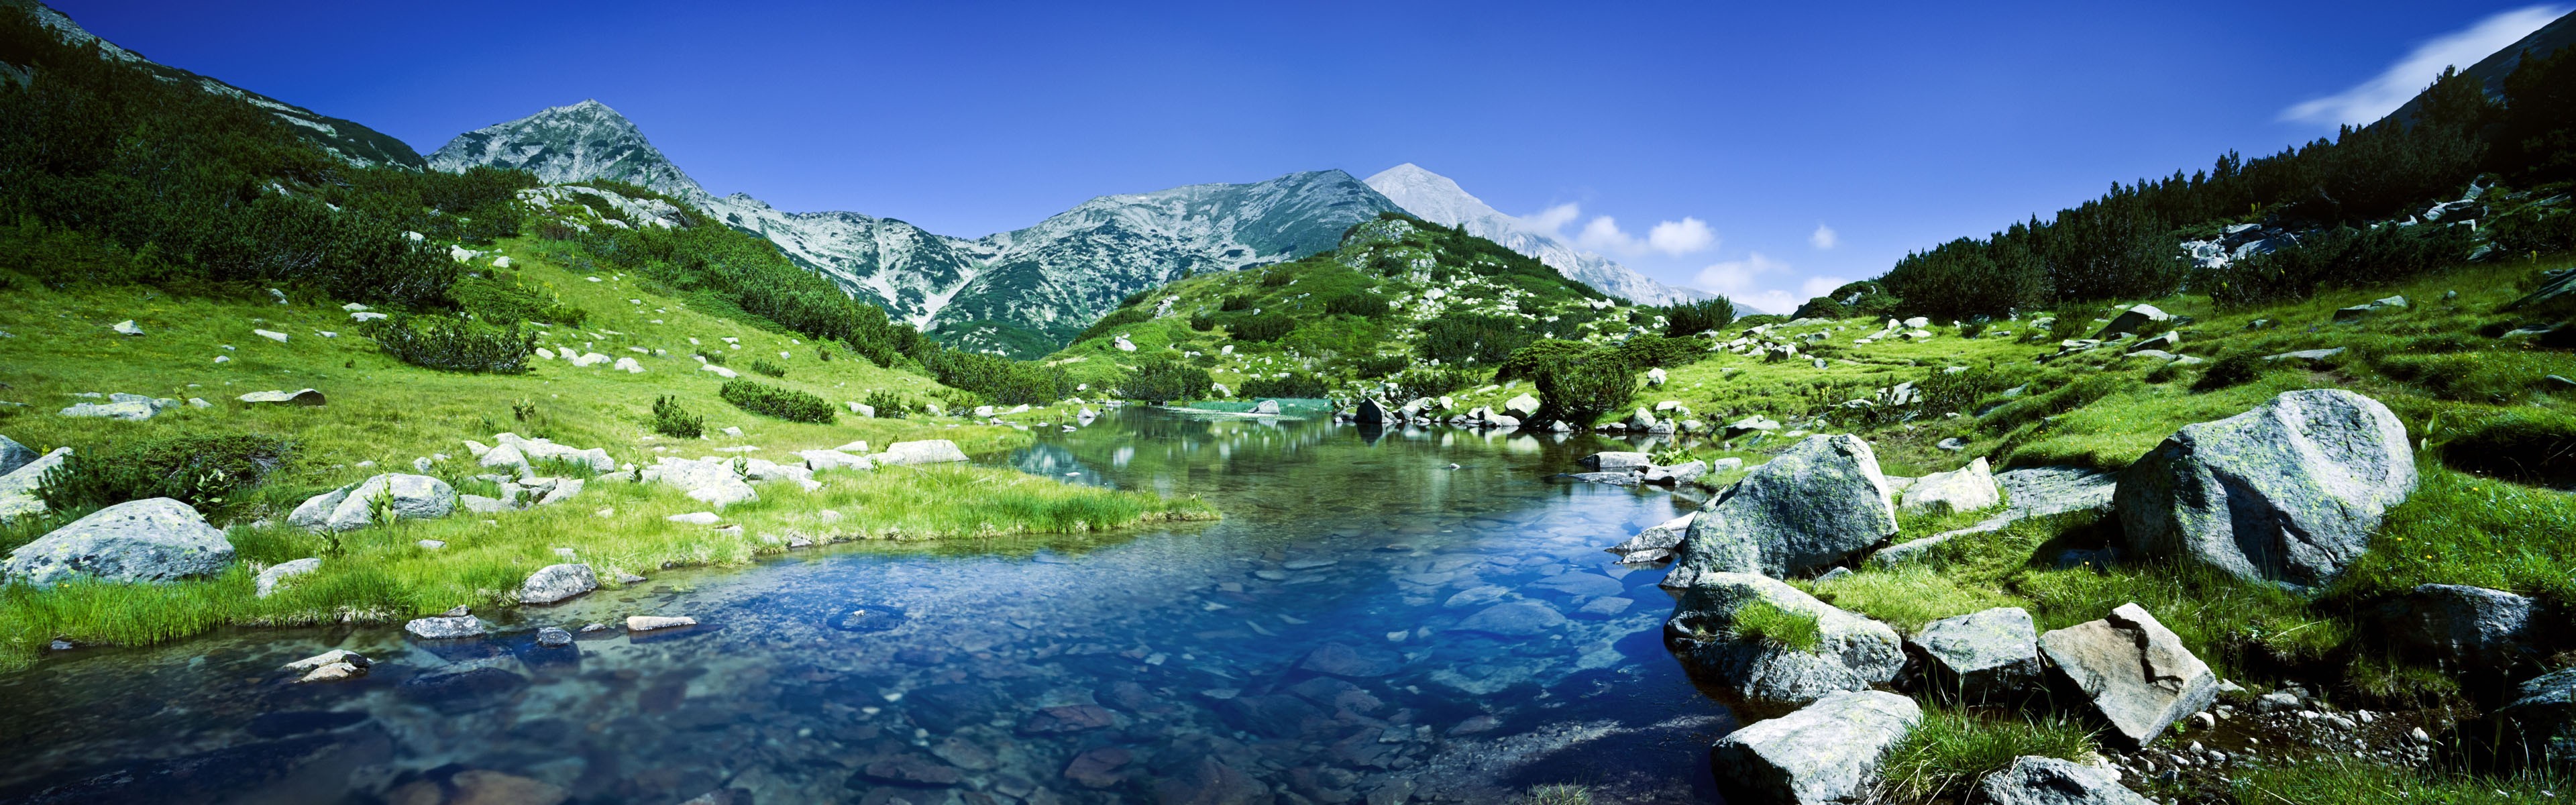 General 3840x1200 landscape nature water mountains